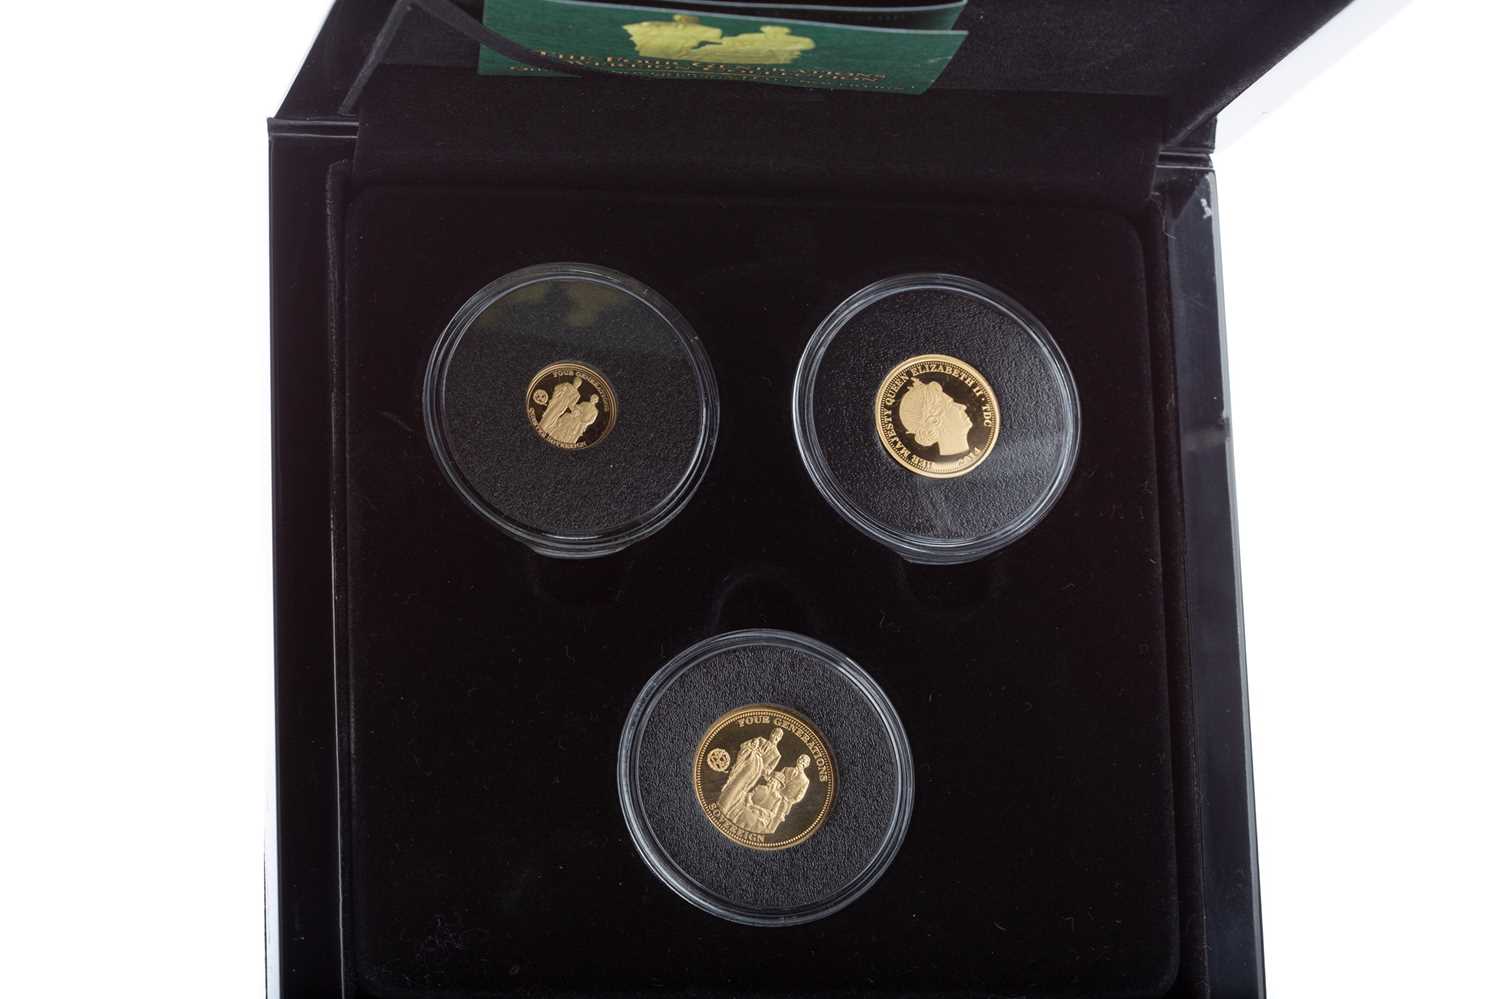 THE 2014 FOUR GENERATIONS GOLD SOVEREIGN COLLECTION